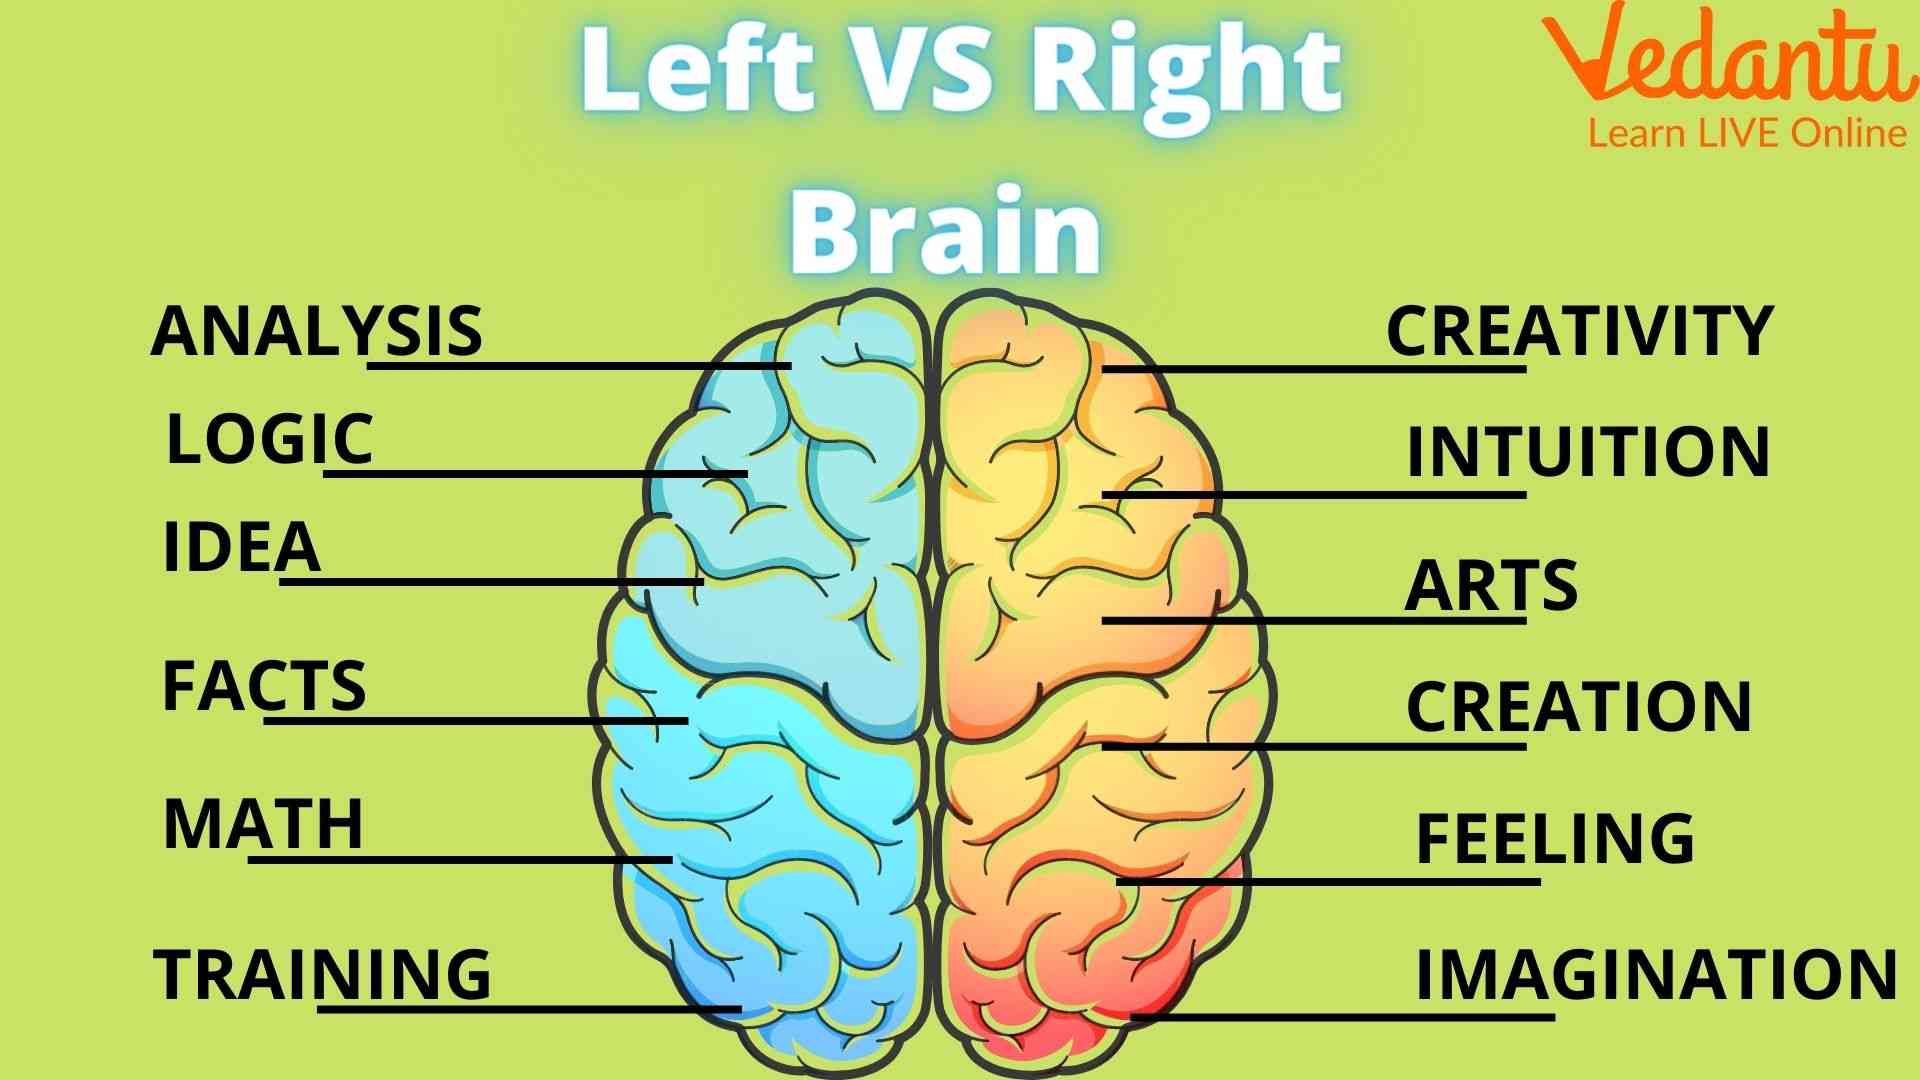 Right and left brain